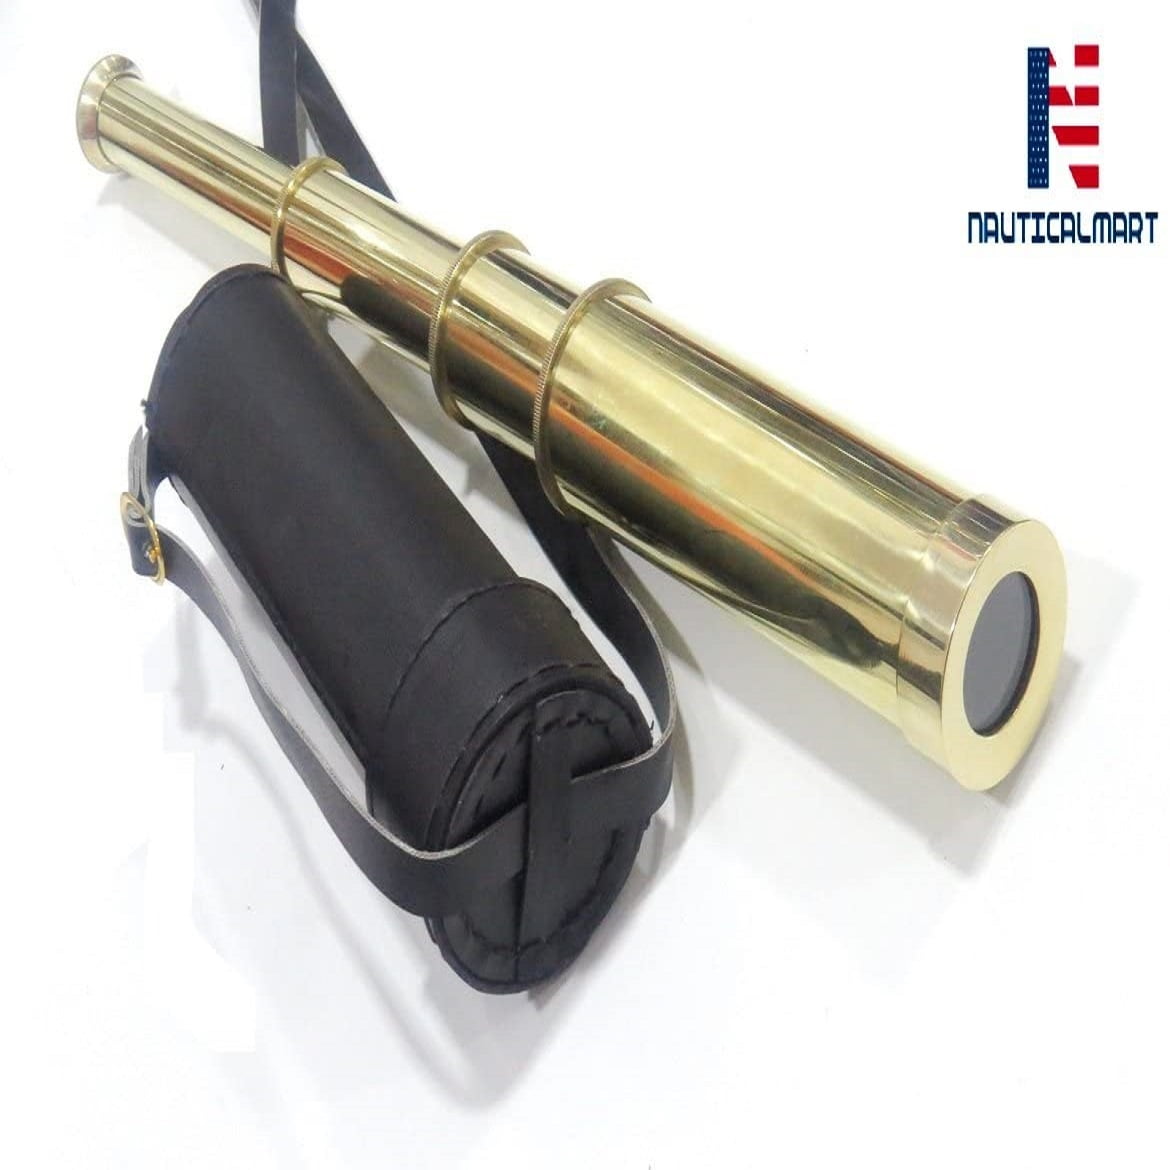 15 Solid Brass Hand Held Telescope Pirate Spyglass with Leather Case 